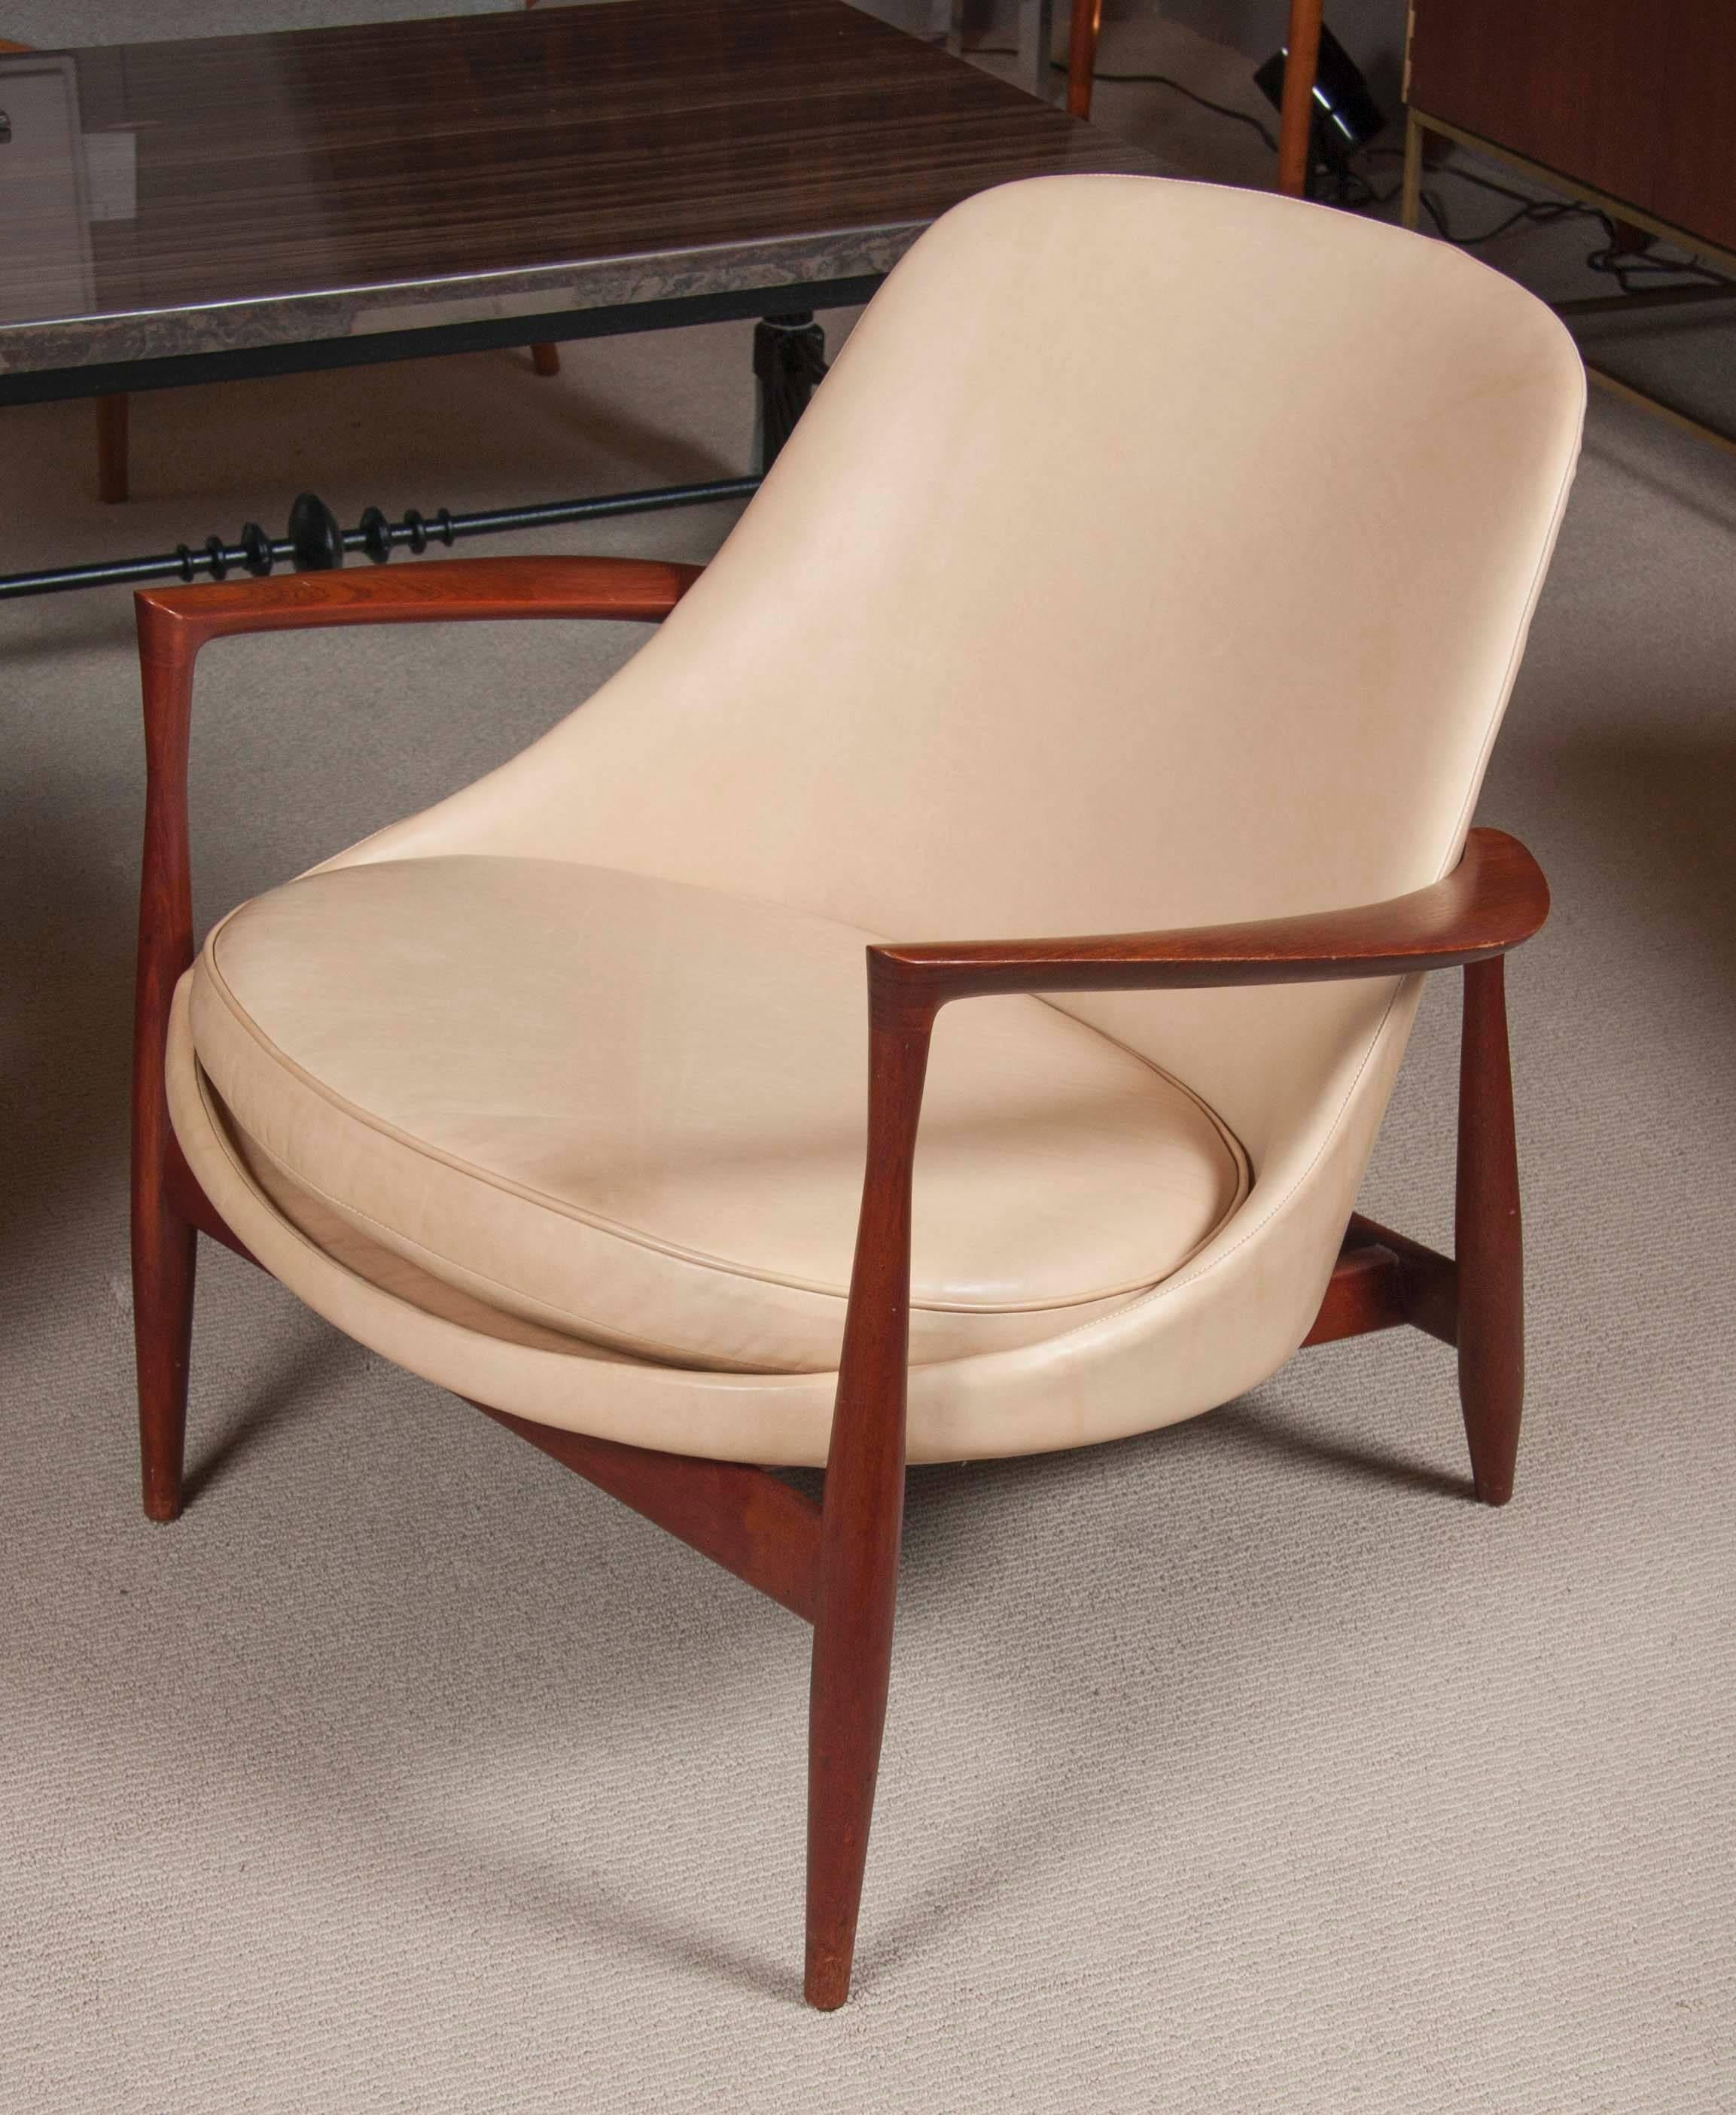 The iconic "Elizabeth" chair by Ib Kofod-Larsen, designed in 1956 and produced by Christensen & Larsen, Denmark. Frame is in teak and seat is newly upholstered in buttery soft leather.